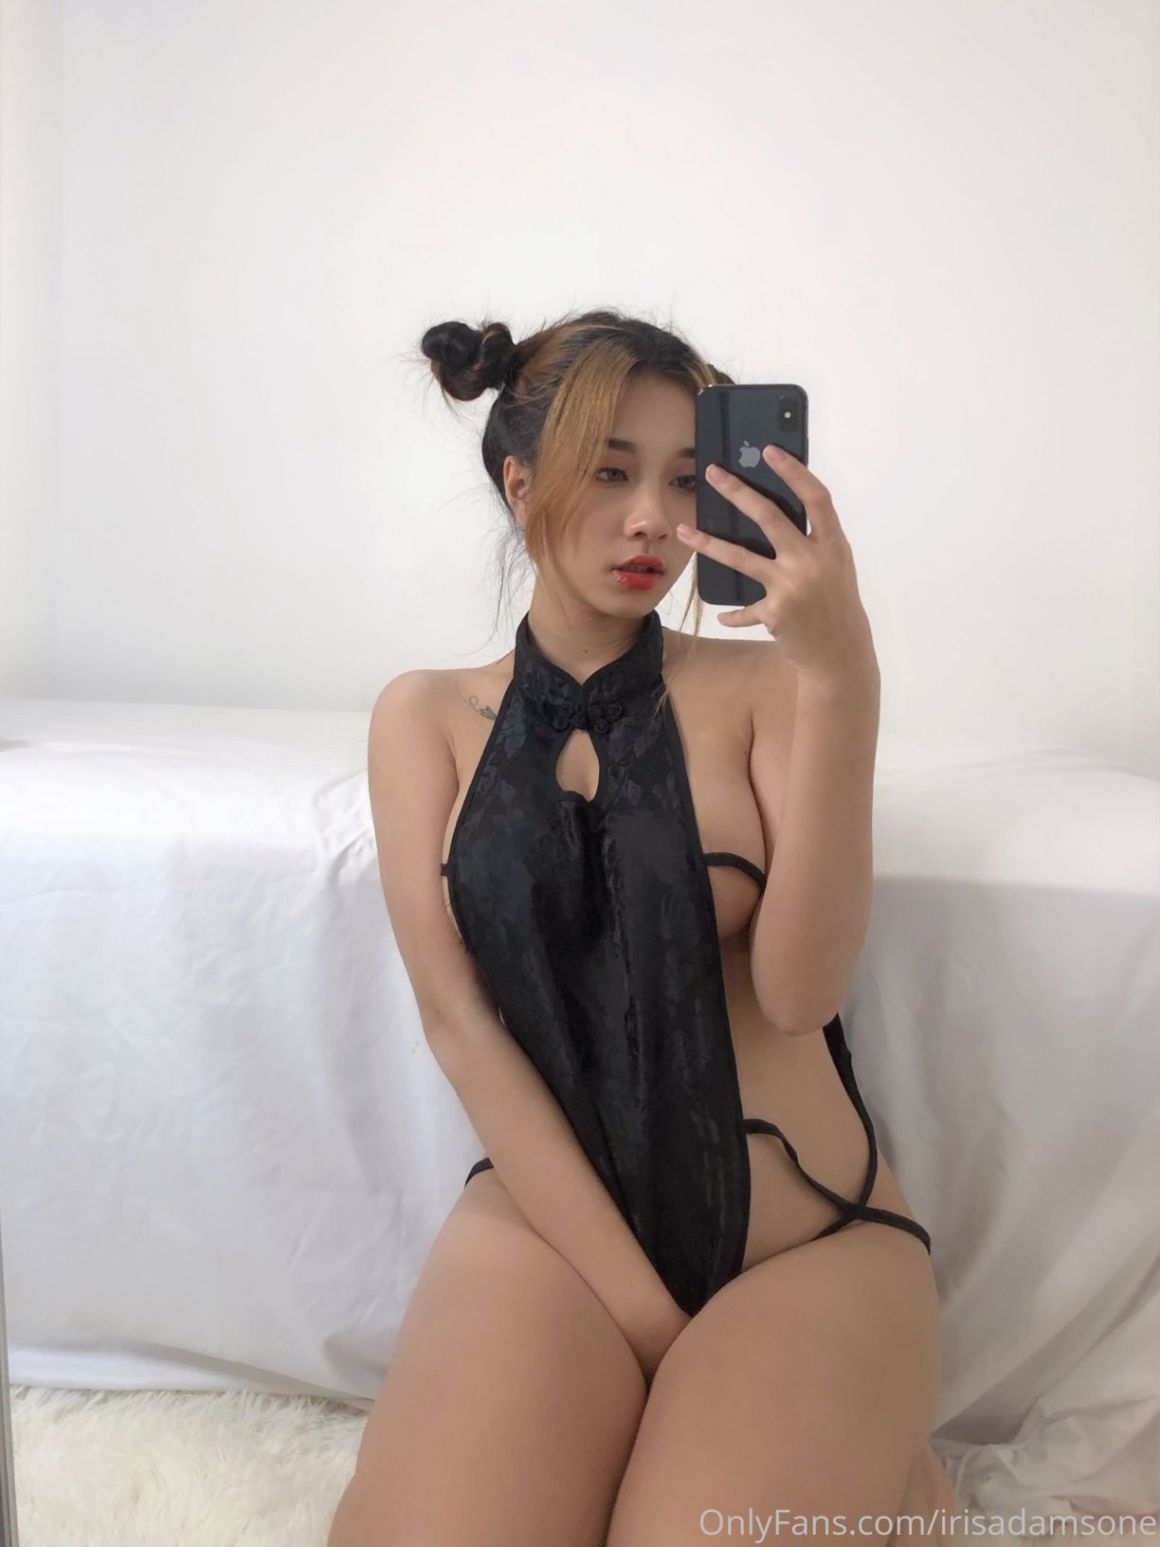 AsianOnlyfans 029 108 20210822